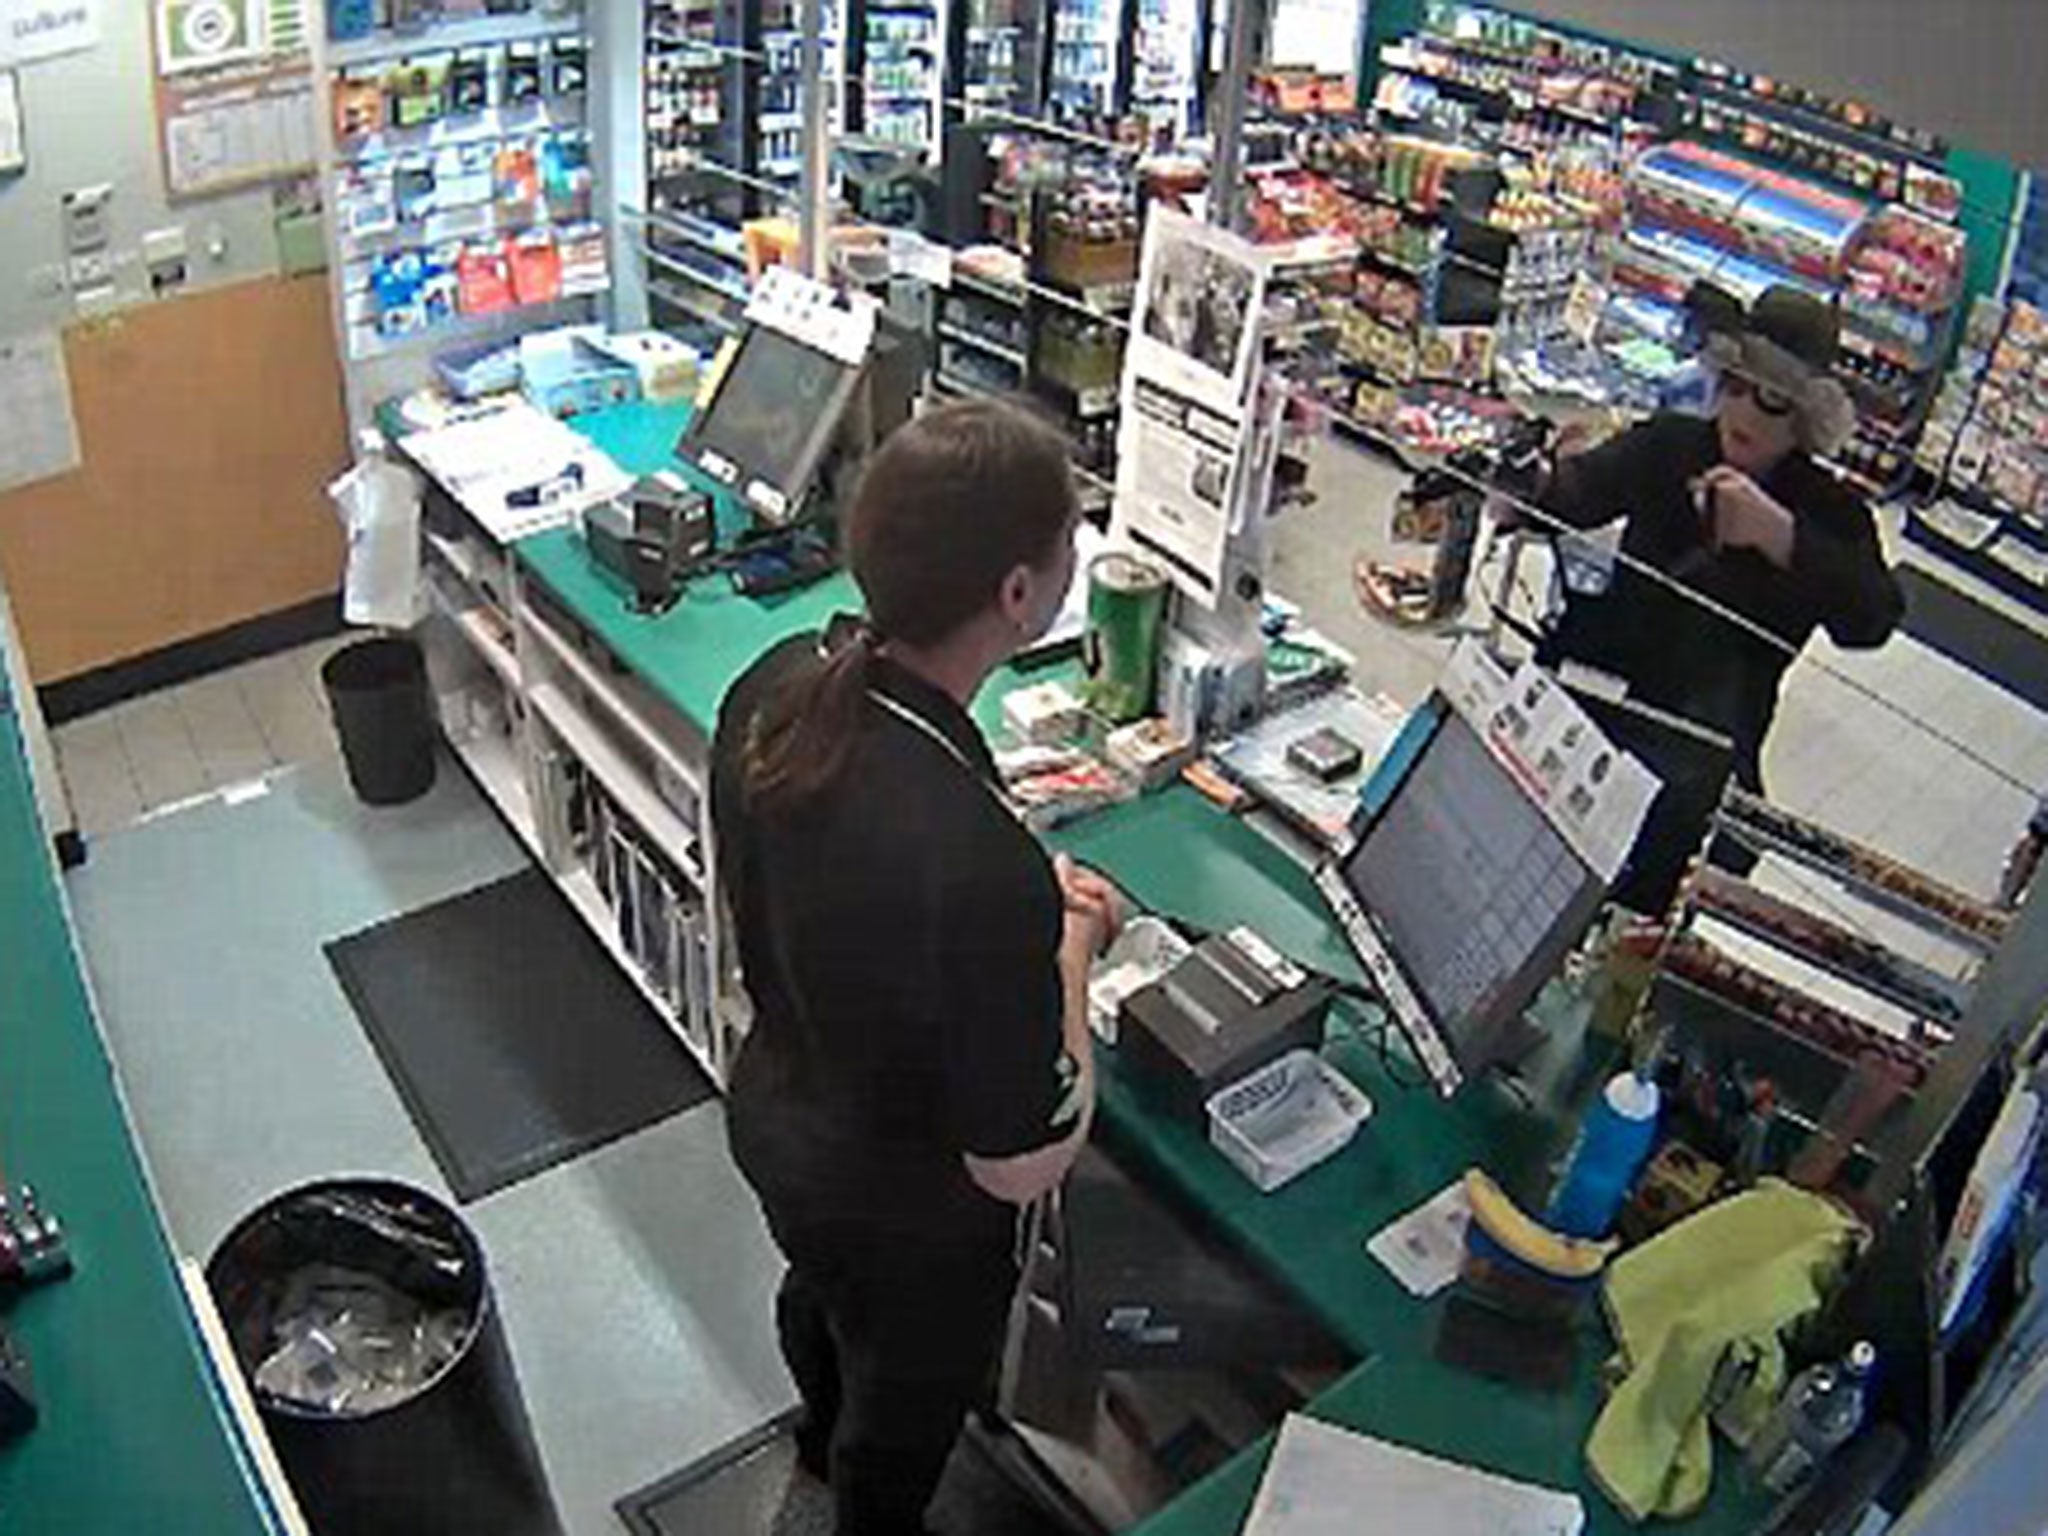 The cross-dressing robber was filmed looking around the shop before threatening the cashier with the weapon